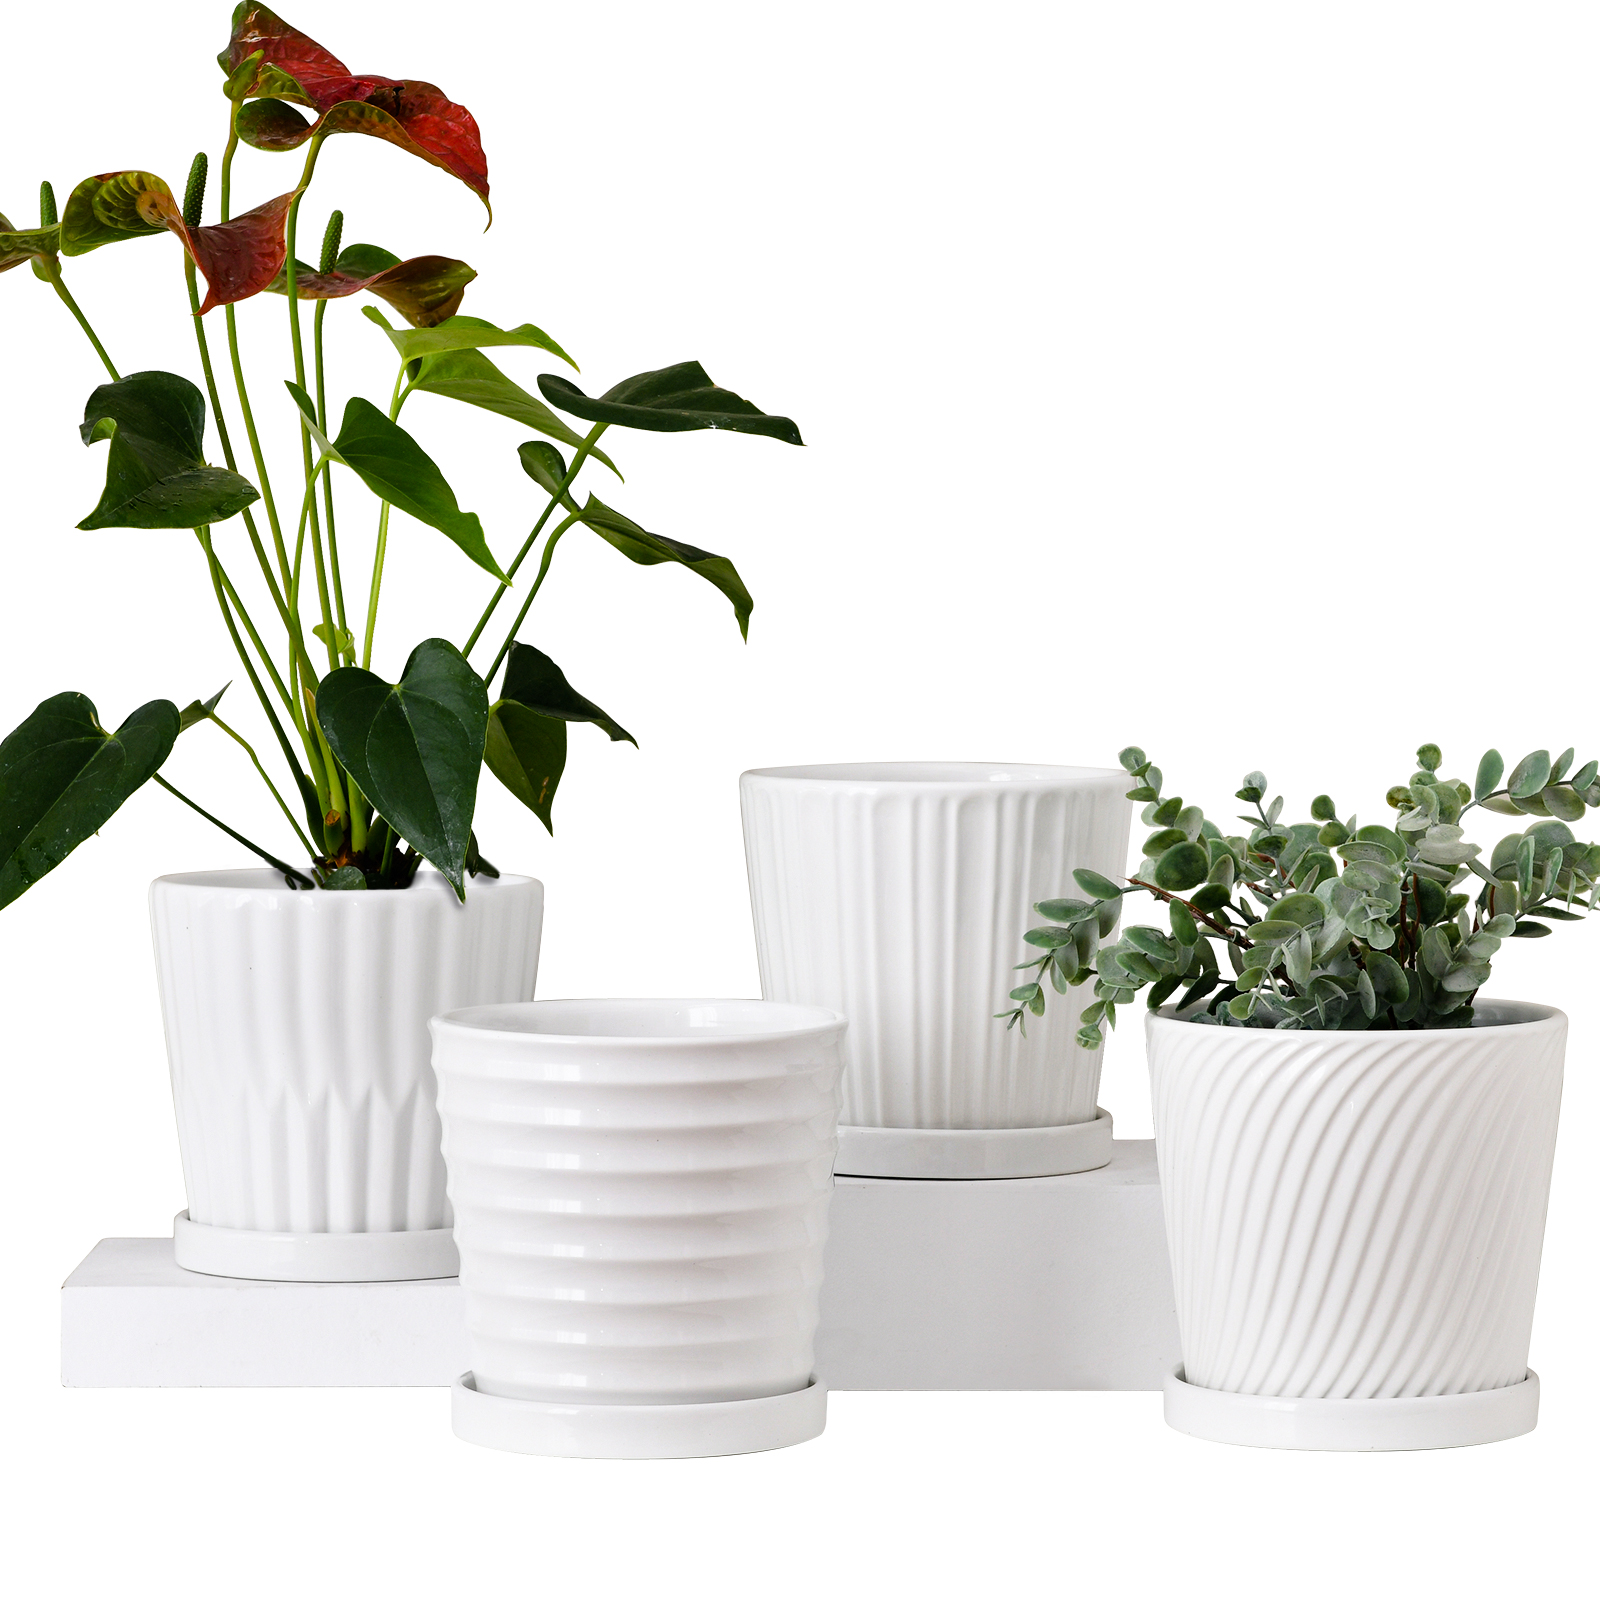 2022 China New Design Porcelain Ceramic Flowerpot -  Small Indoor ceramic Planter pot Modern Flowers Pots with Drainage Holes – Tongxin